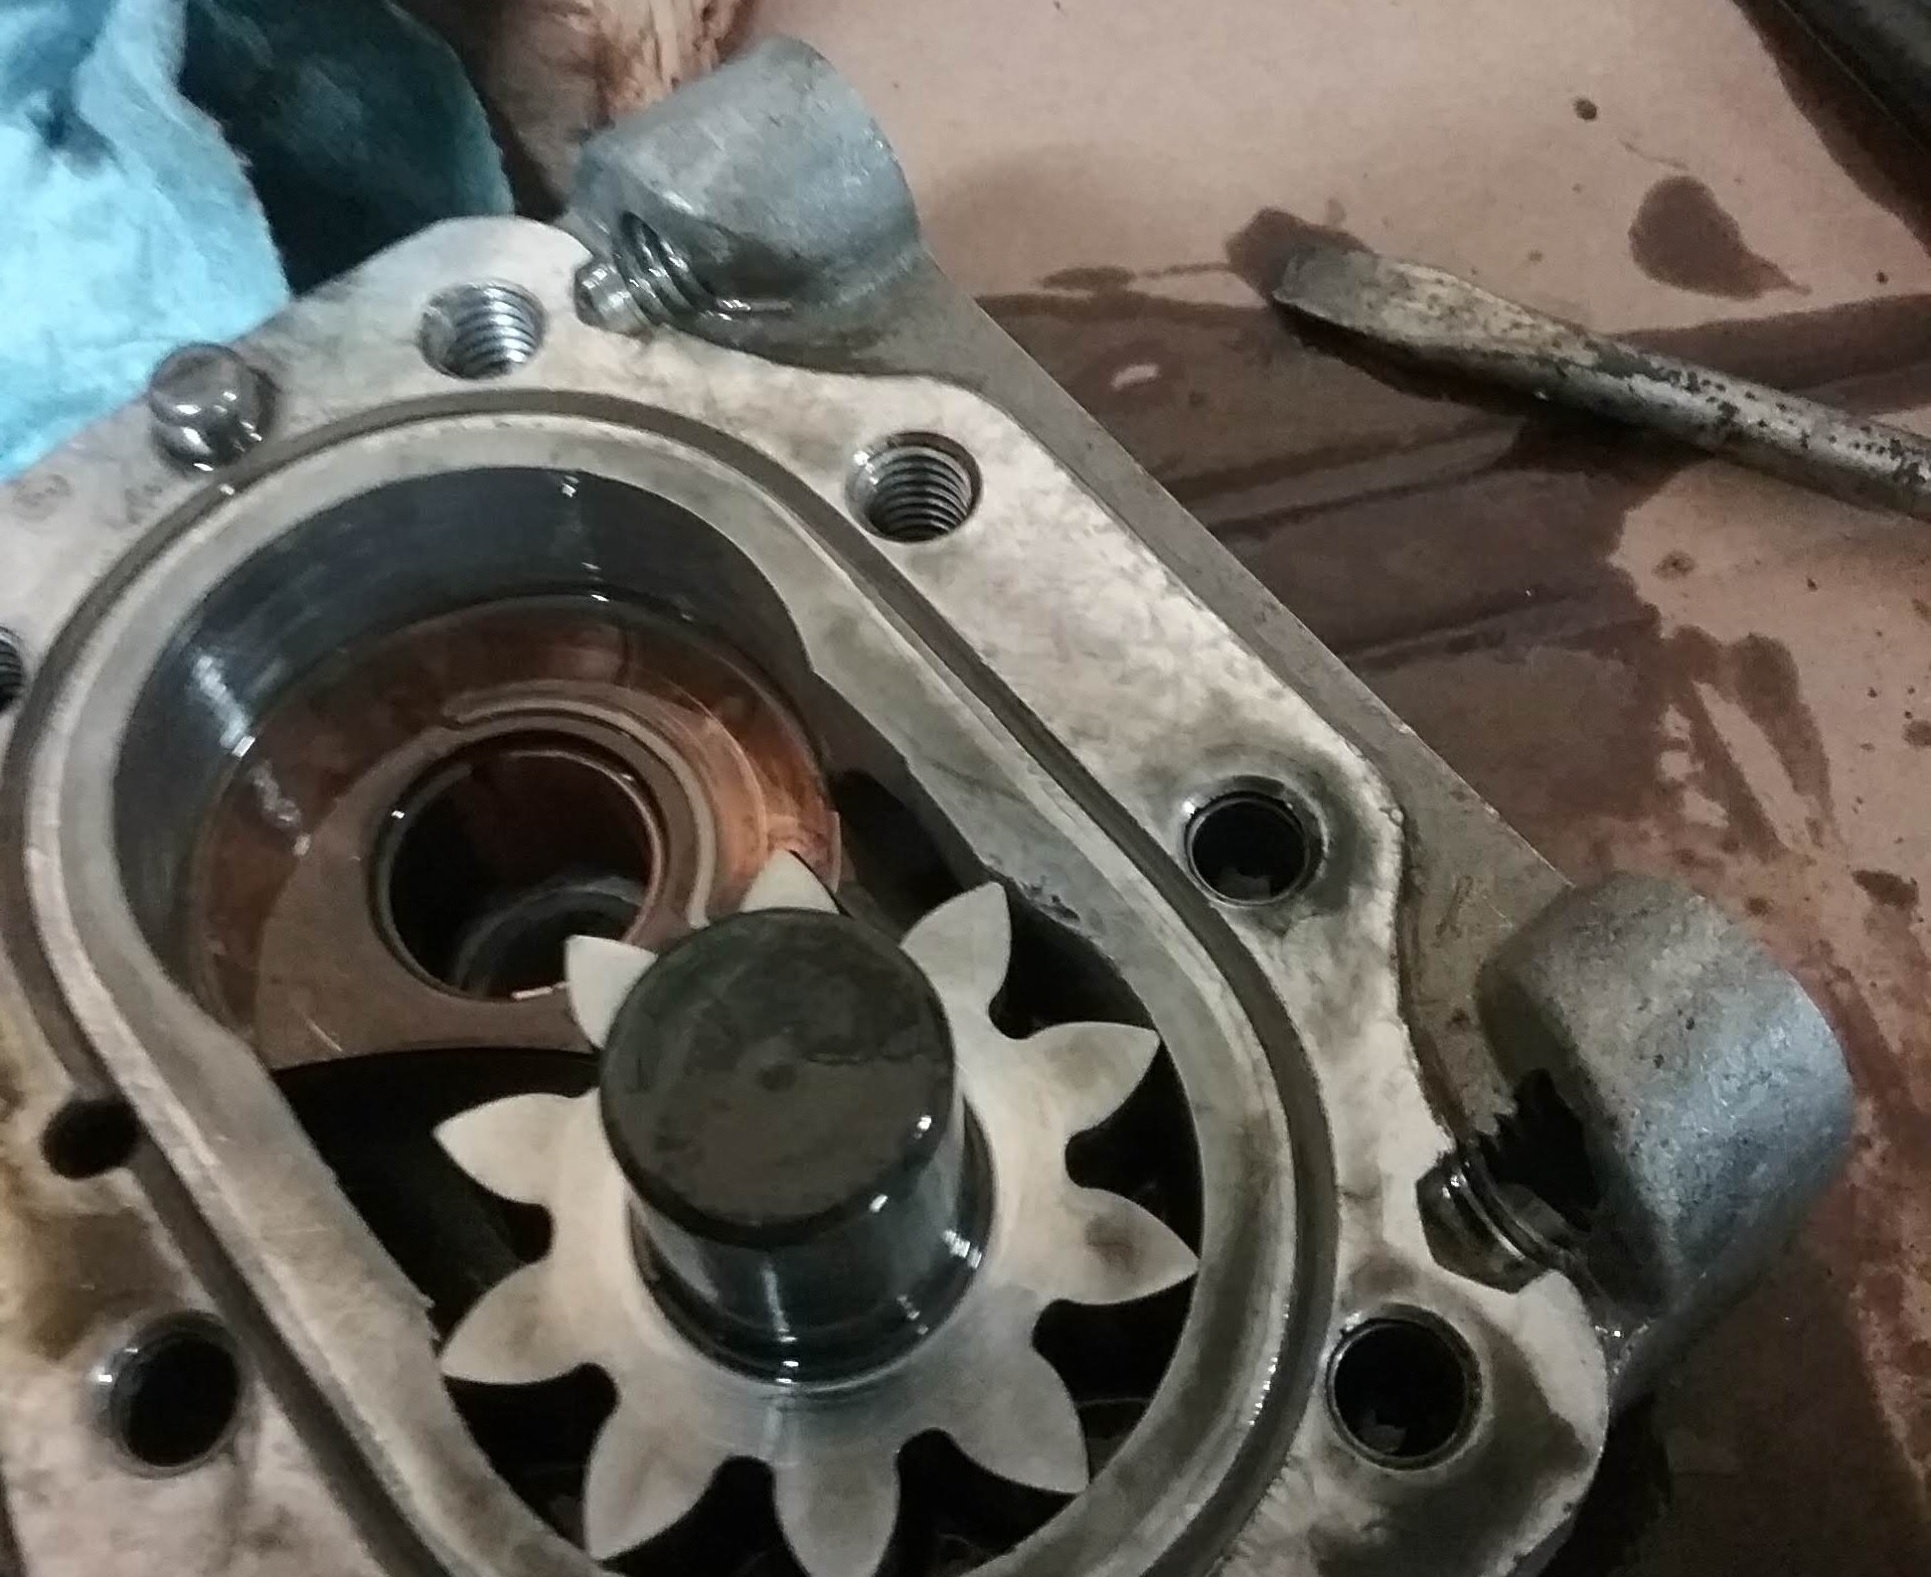 Inside view of a faulty Mitsubishi forklift hydraulic pump